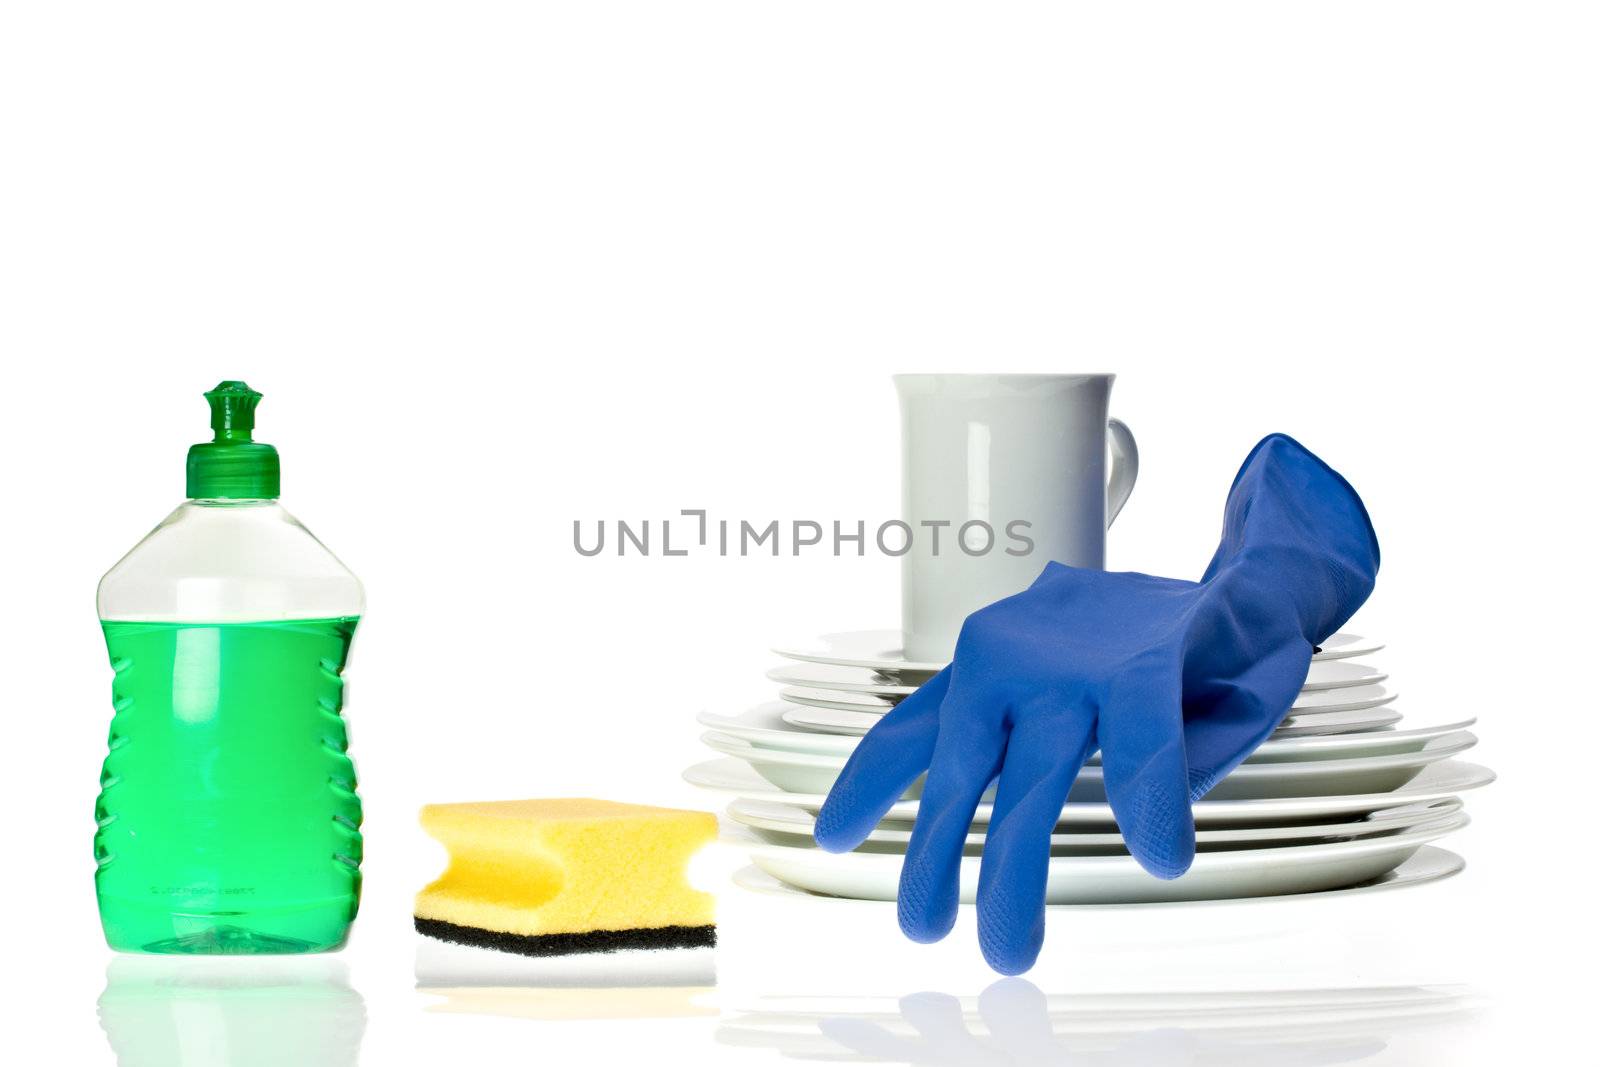 dinnerware and cleaning utensils isolated on white background by bernjuer